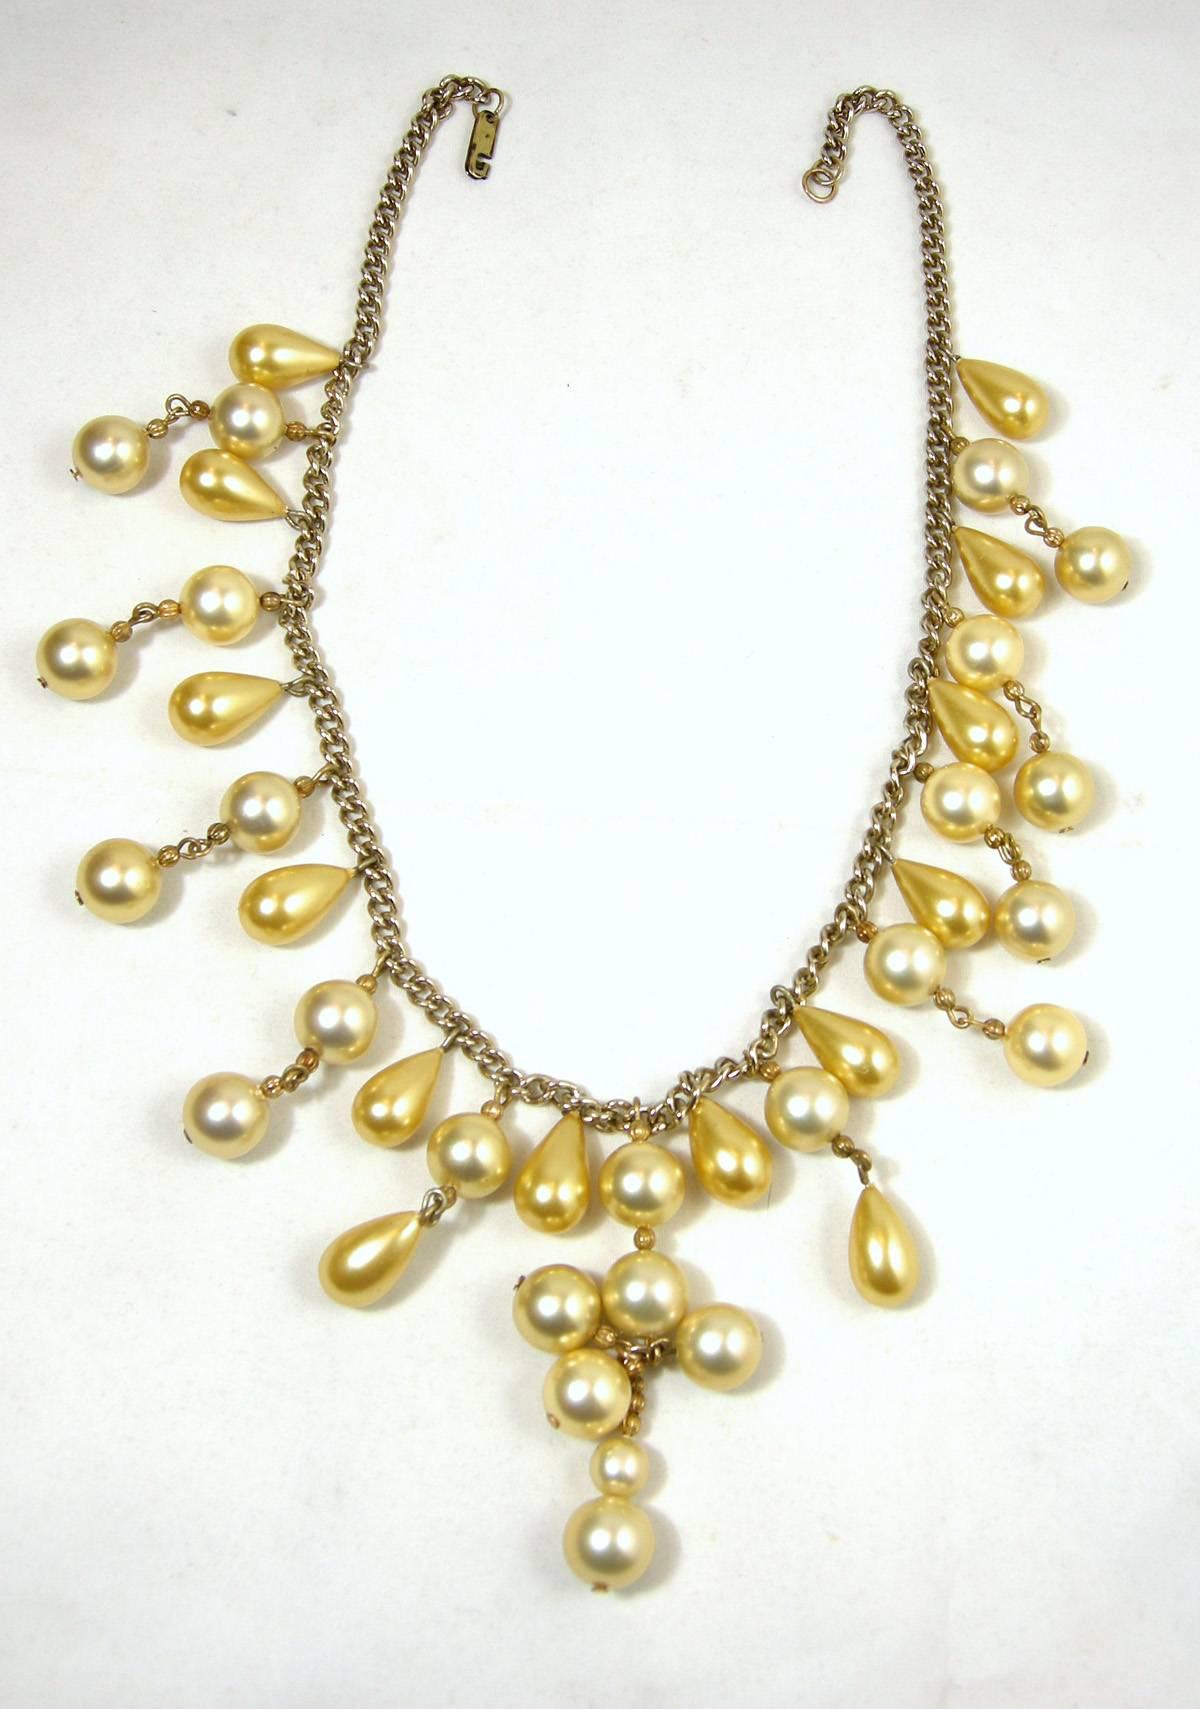 This vintage faux golden pearl bib necklace is from the 1930s.   The golden pearls are very desirable and these pearls have a mixture of round and tear-shaped connected to a gold tone chain.  It has the old-fashioned slide-in lock clasp from the 30s